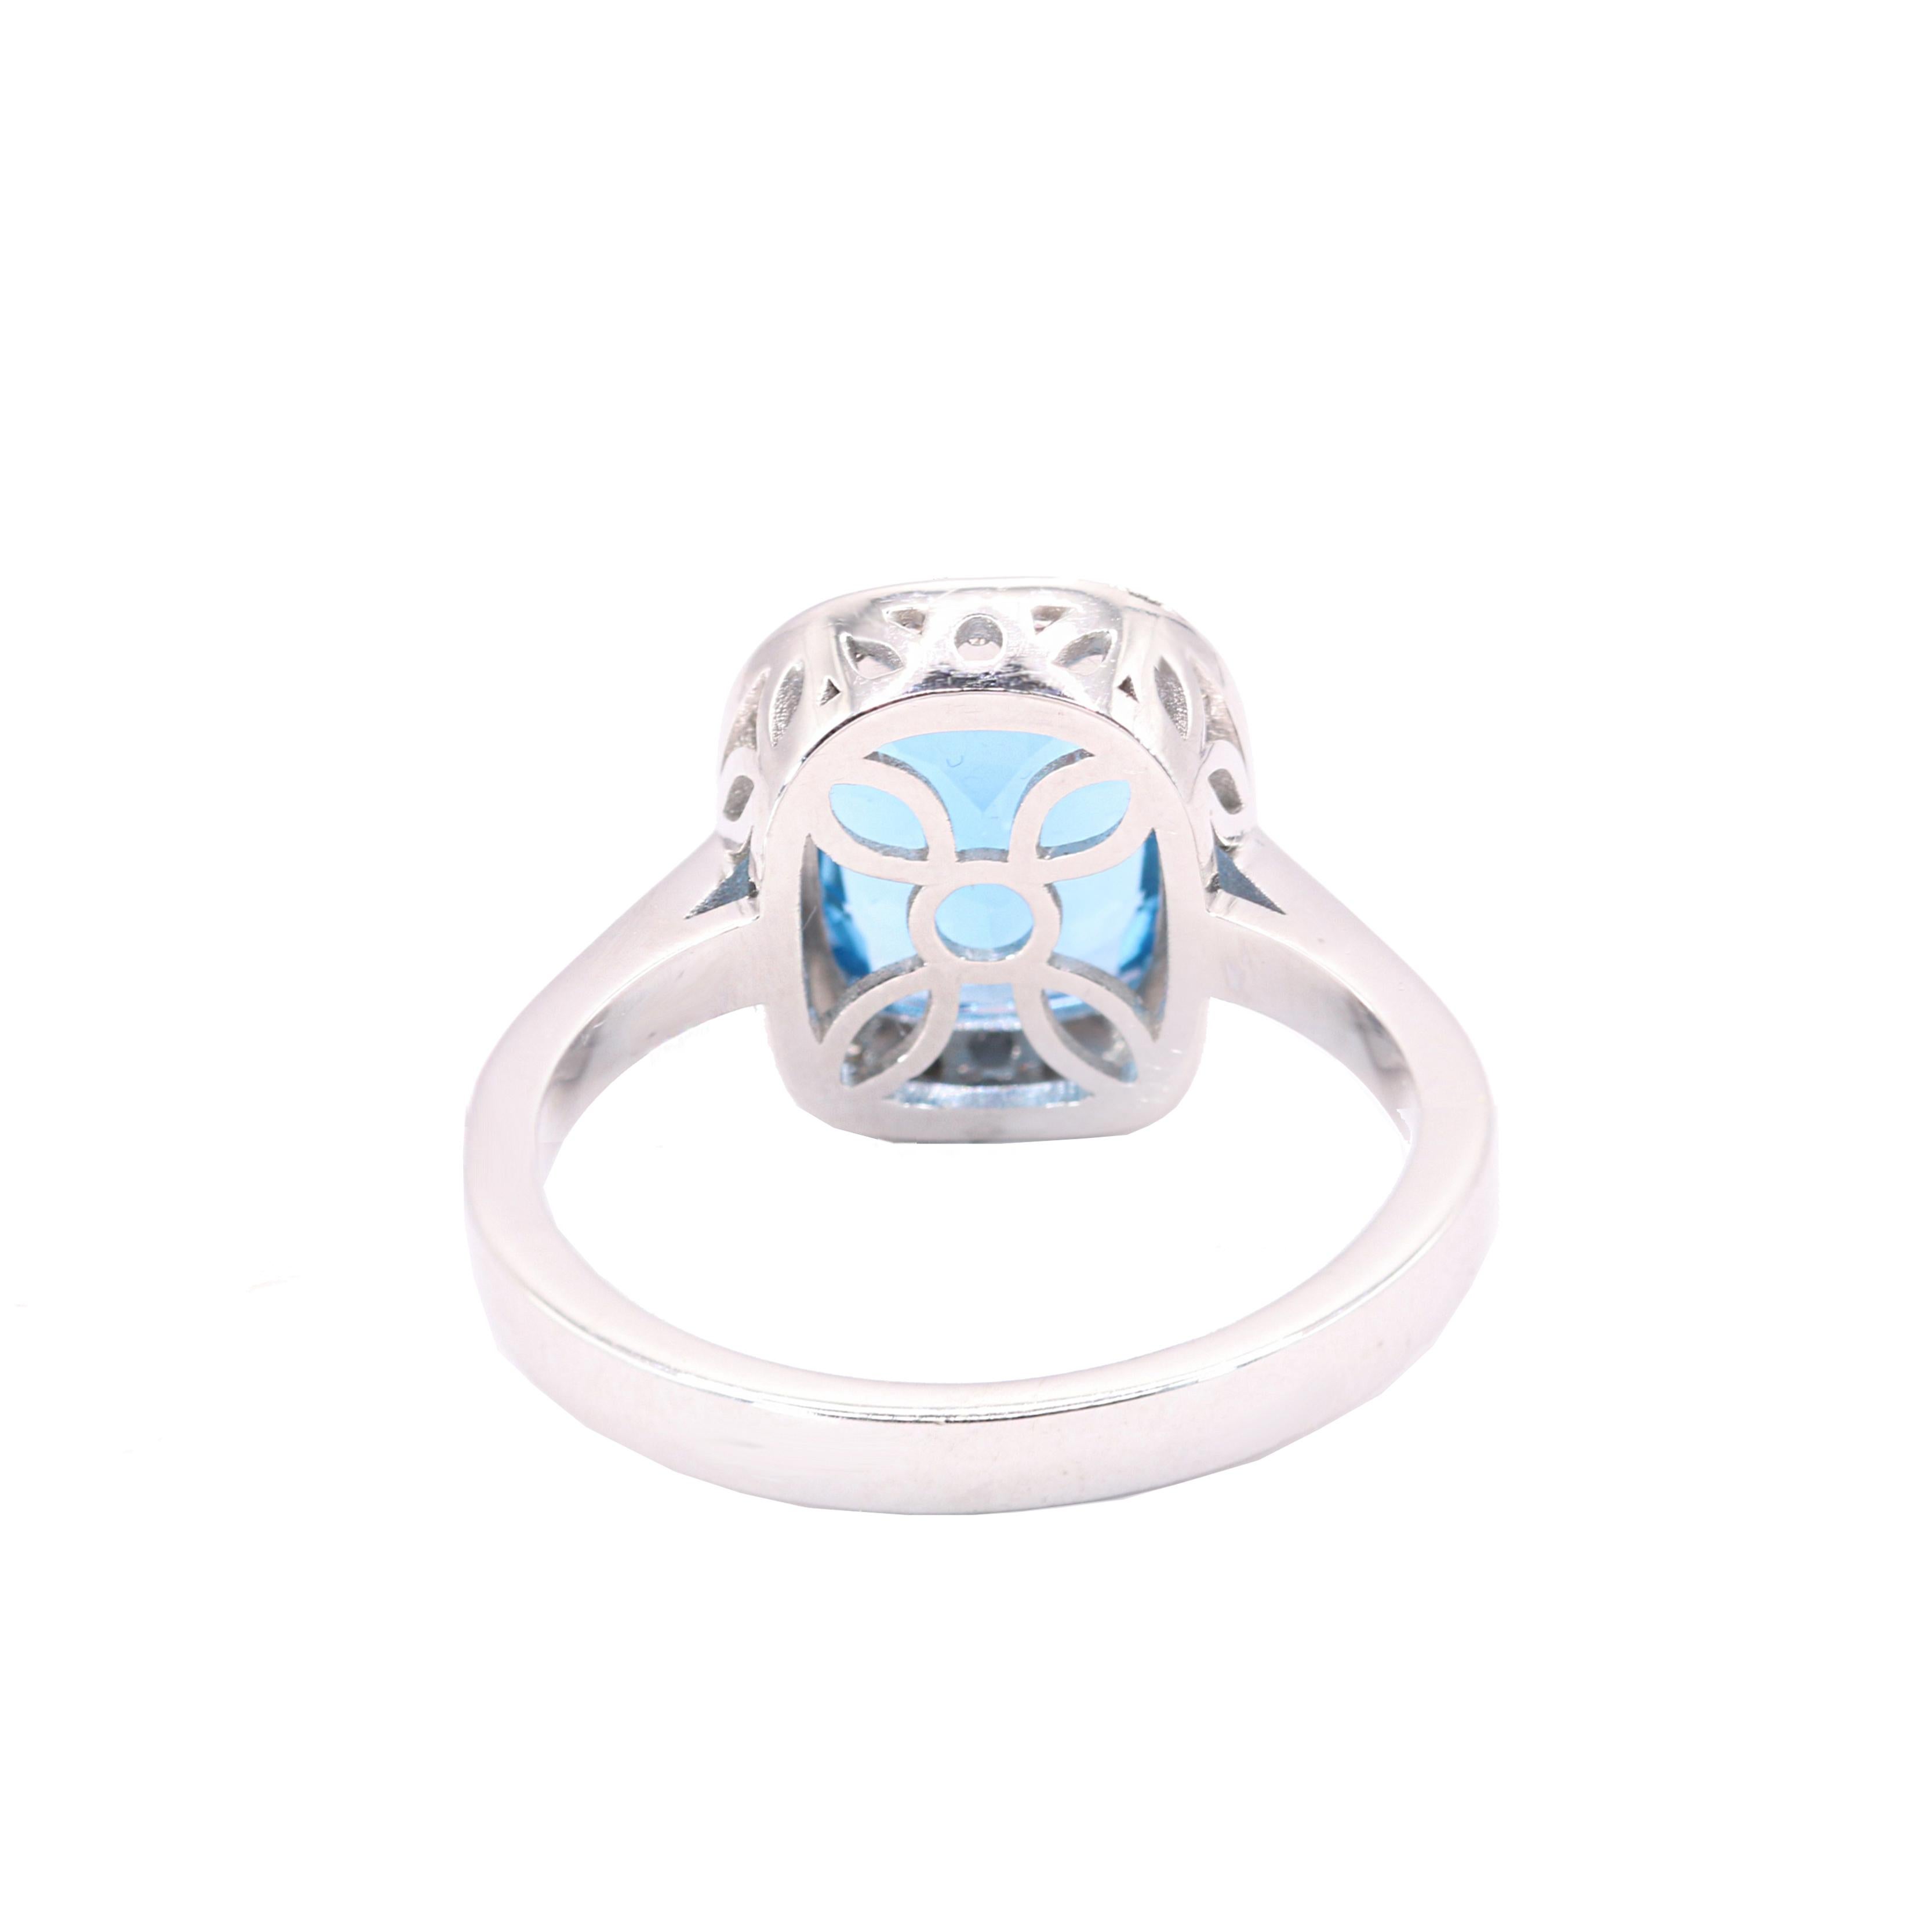 Oval Cut Georgios Collections 18 Karat White Gold Blue Topaz Ring with Diamond Bezel For Sale